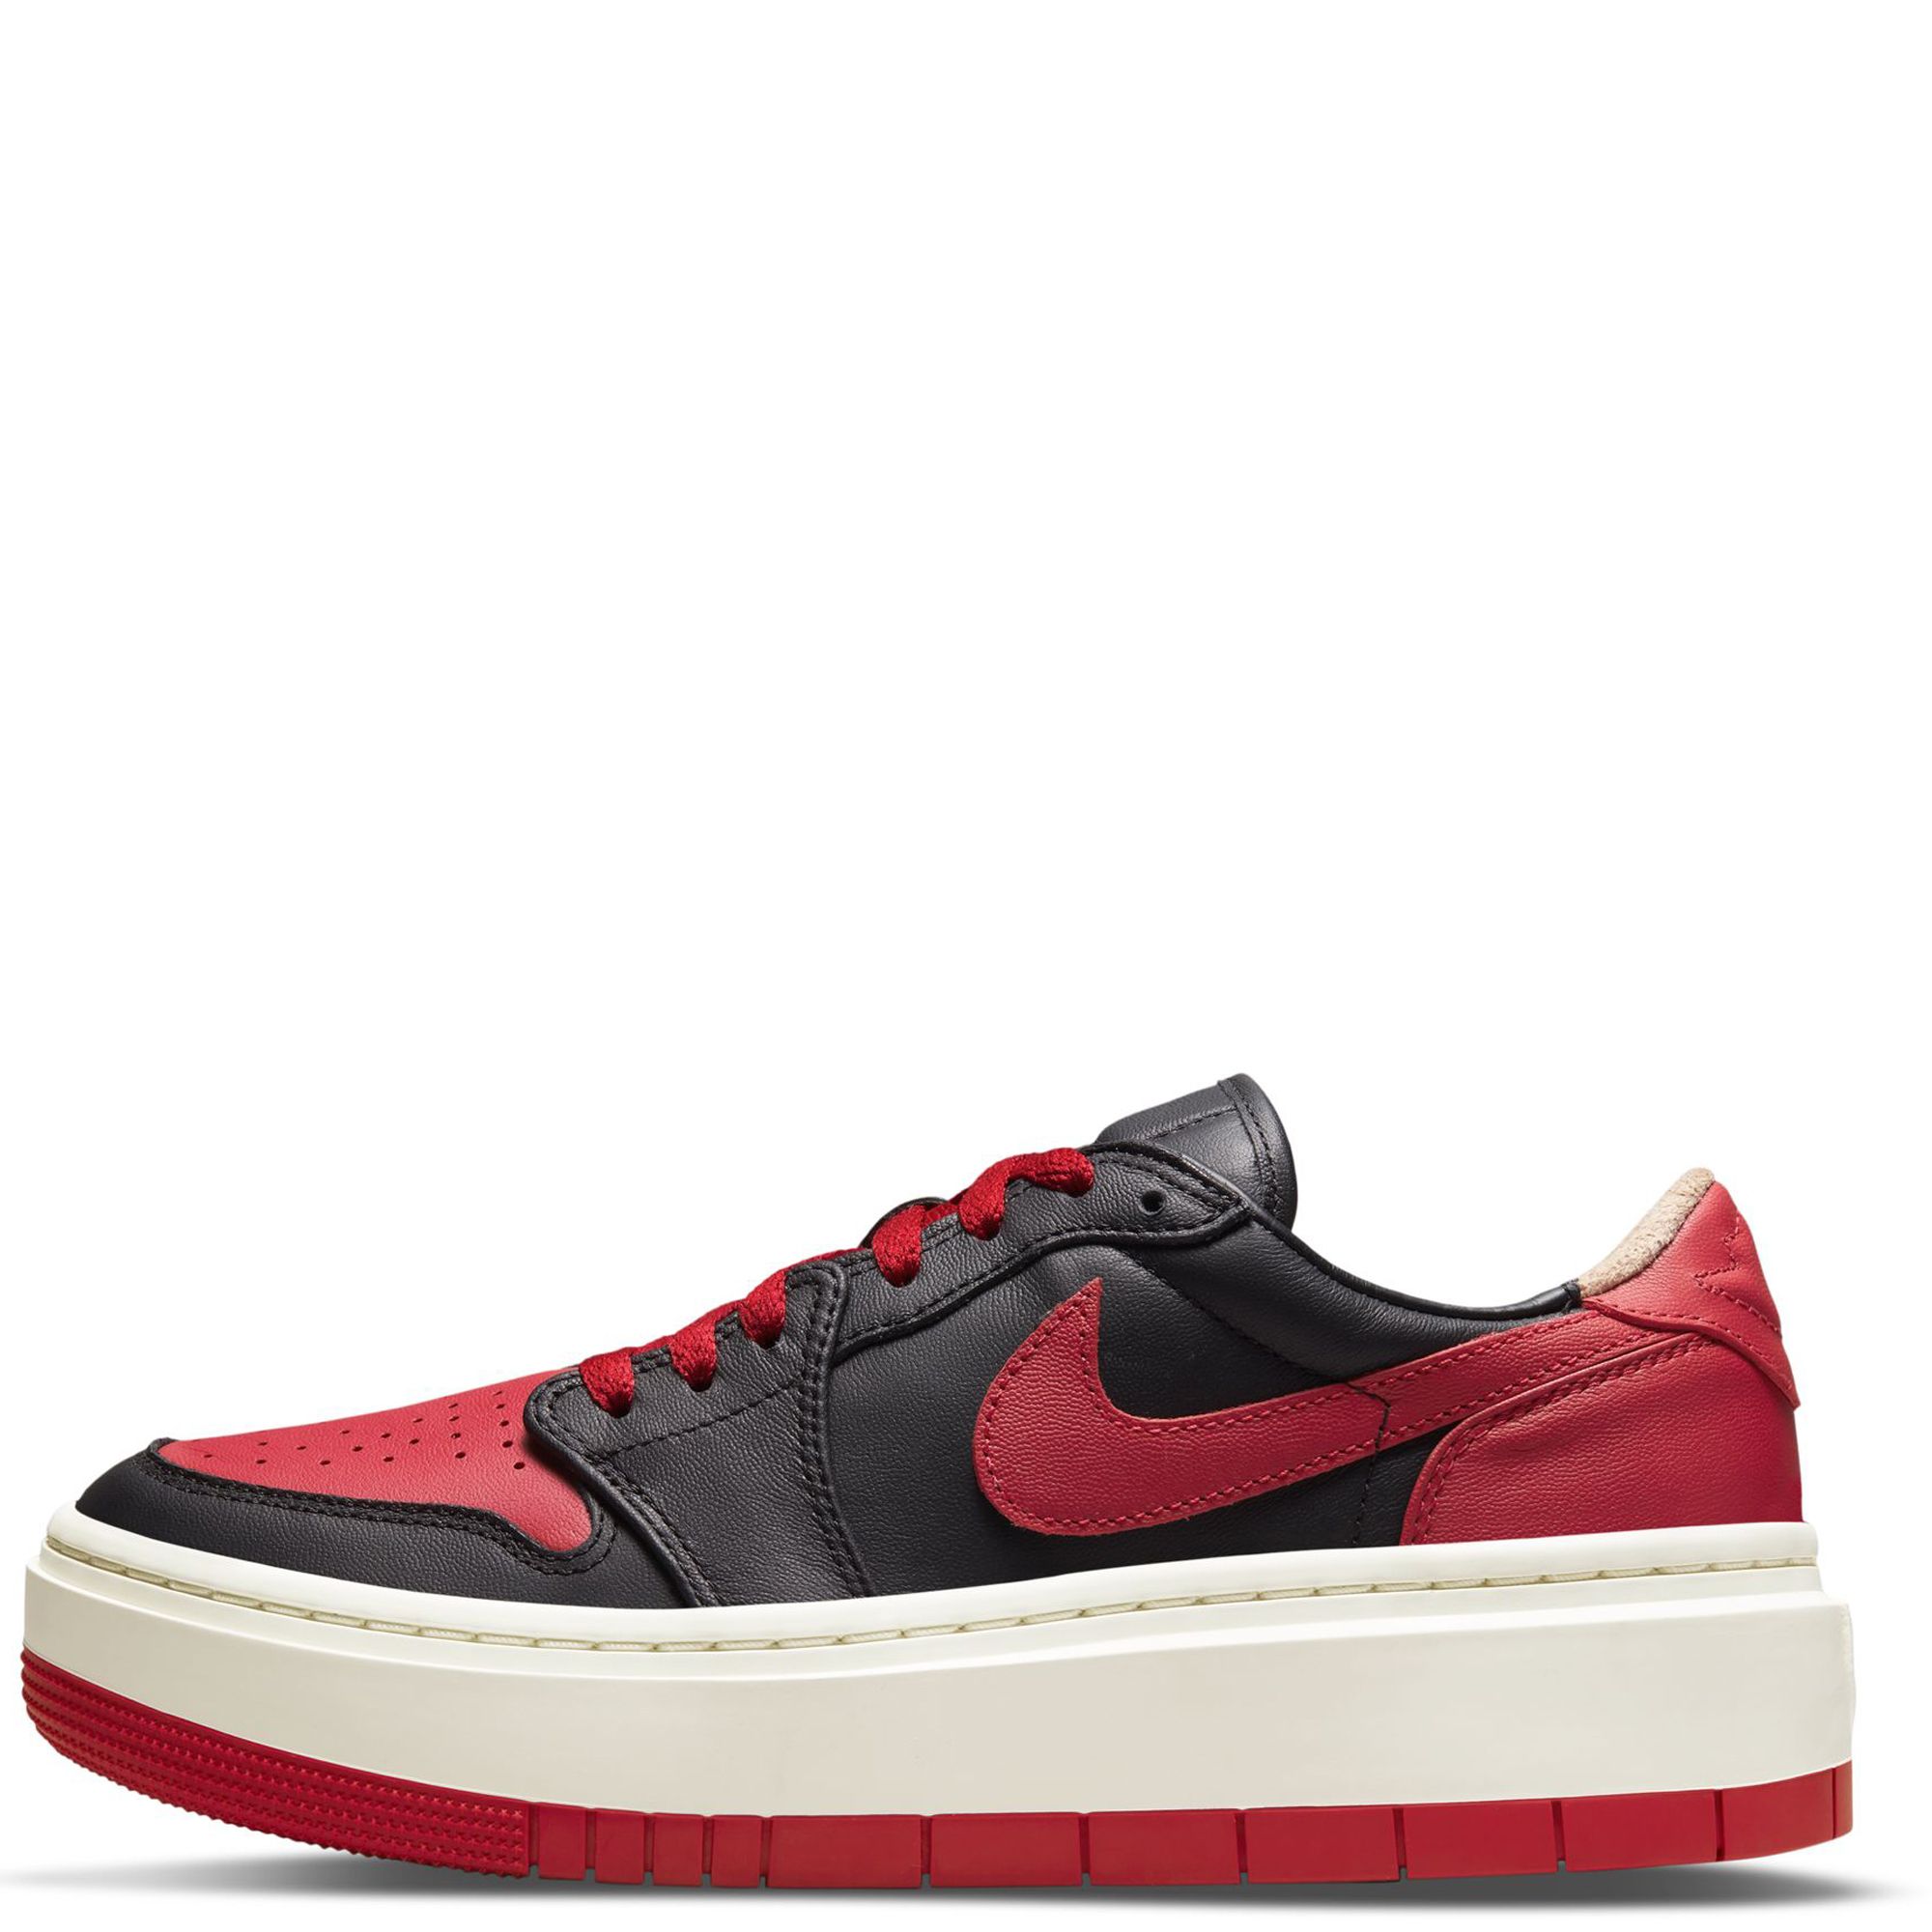 Keep it Festive with this Nike Air Force 1 Low in Gym Red